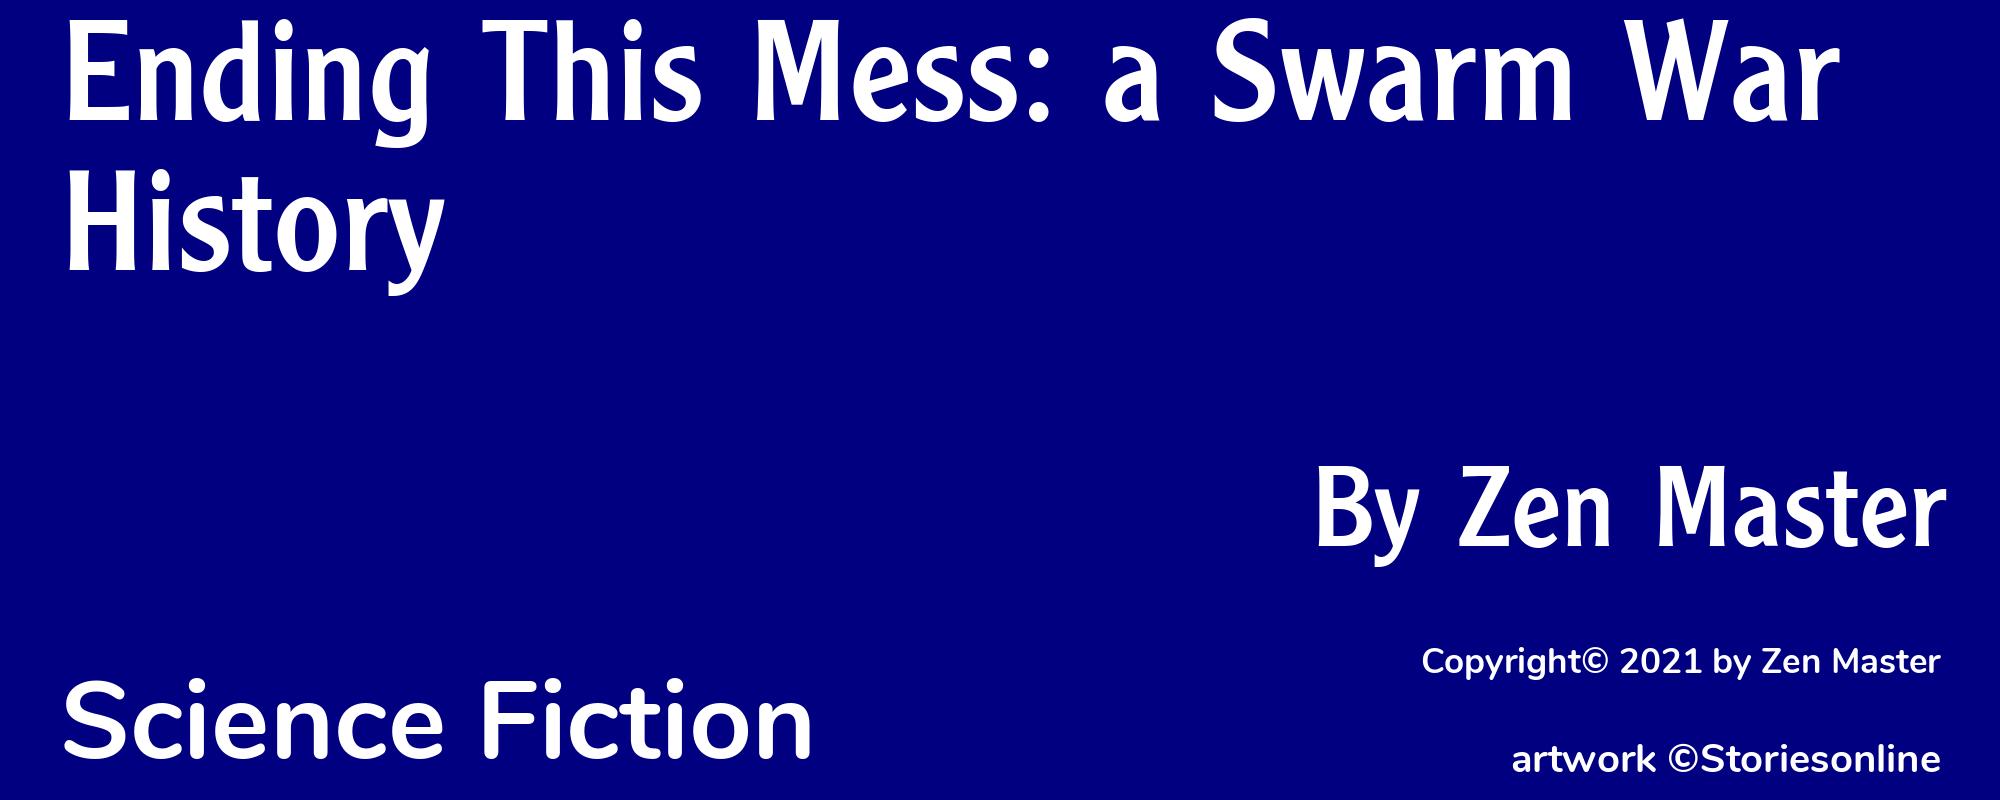 Ending This Mess: a Swarm War History - Cover